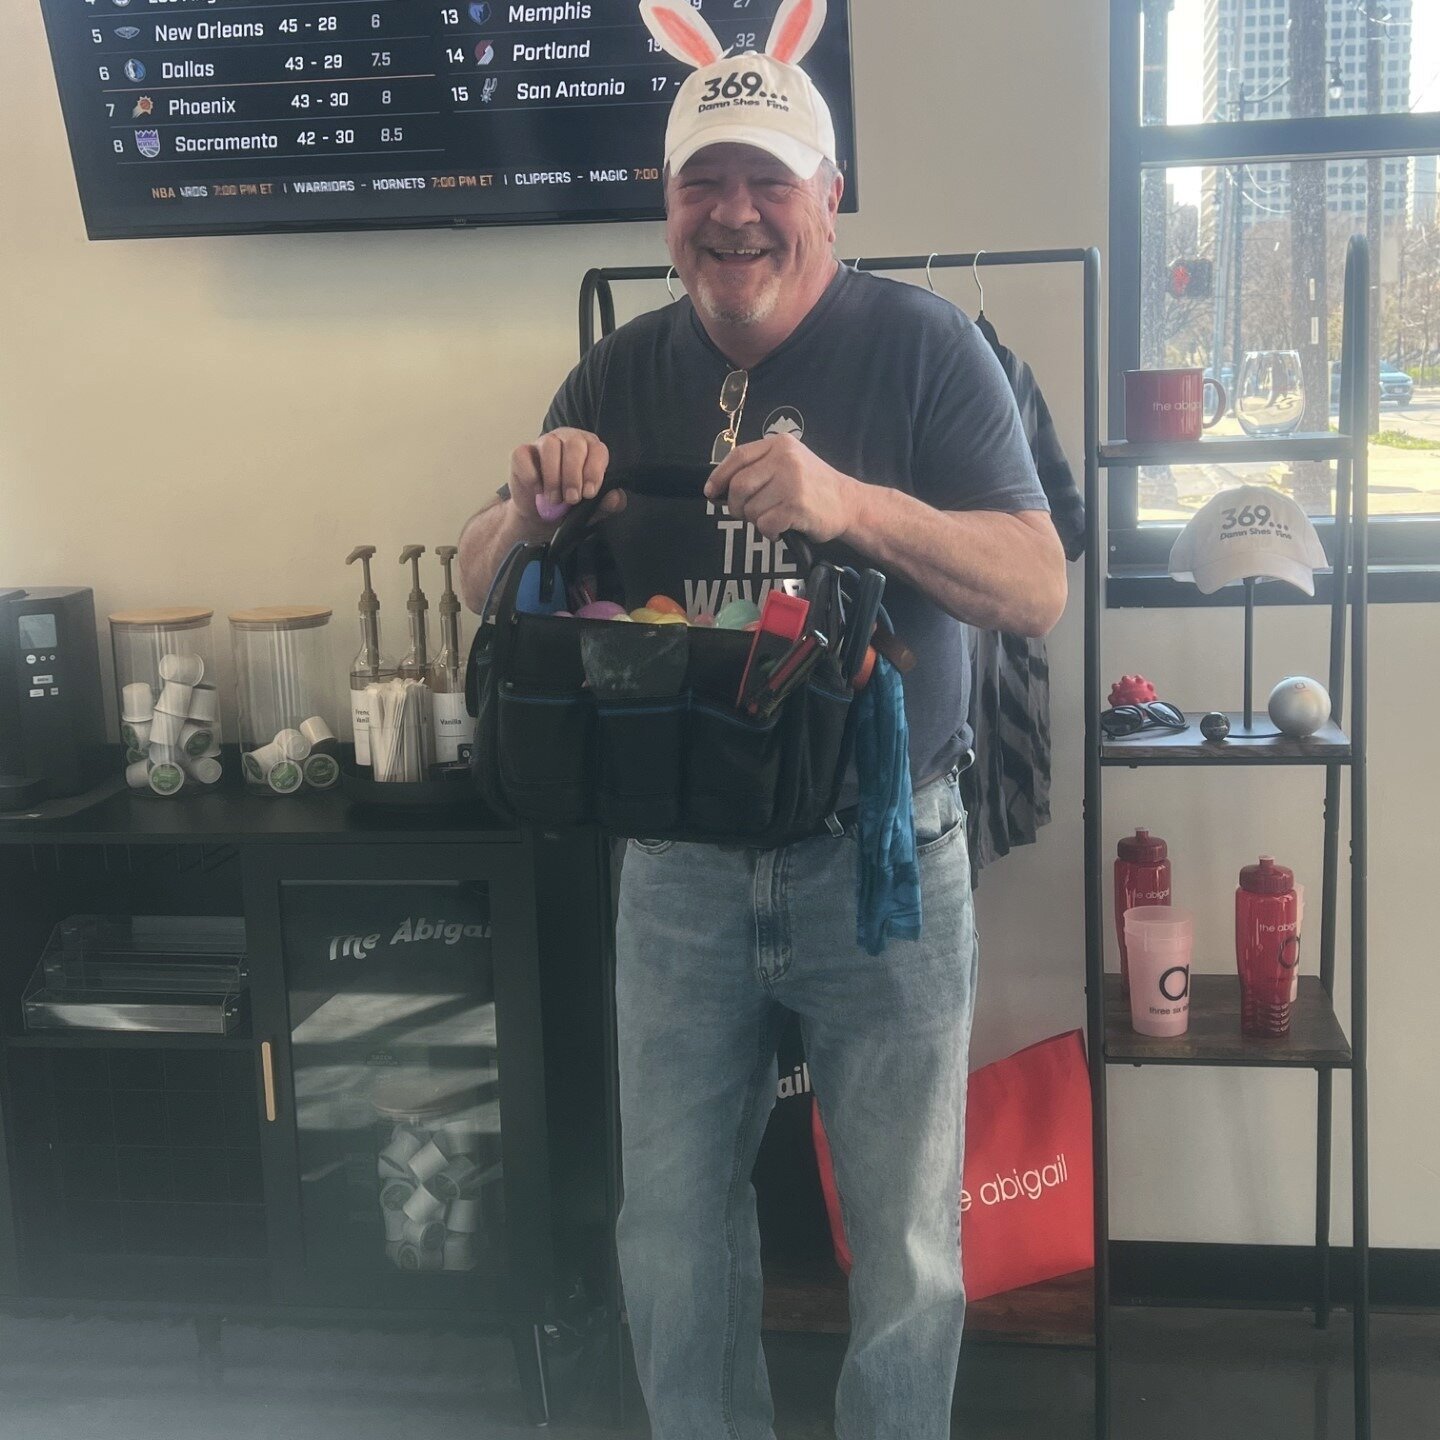 EGG HUNT ALERT 🐣

🐰Brad Bunny has hidden 34 eggs all throughout The Abigail! Keep a lookout for them, and if they contain anything that needs to be claimed, bring them to the office to be redeemed!🌷

🐇Hoppy Easter &amp; Happy Hunting!😉

#student